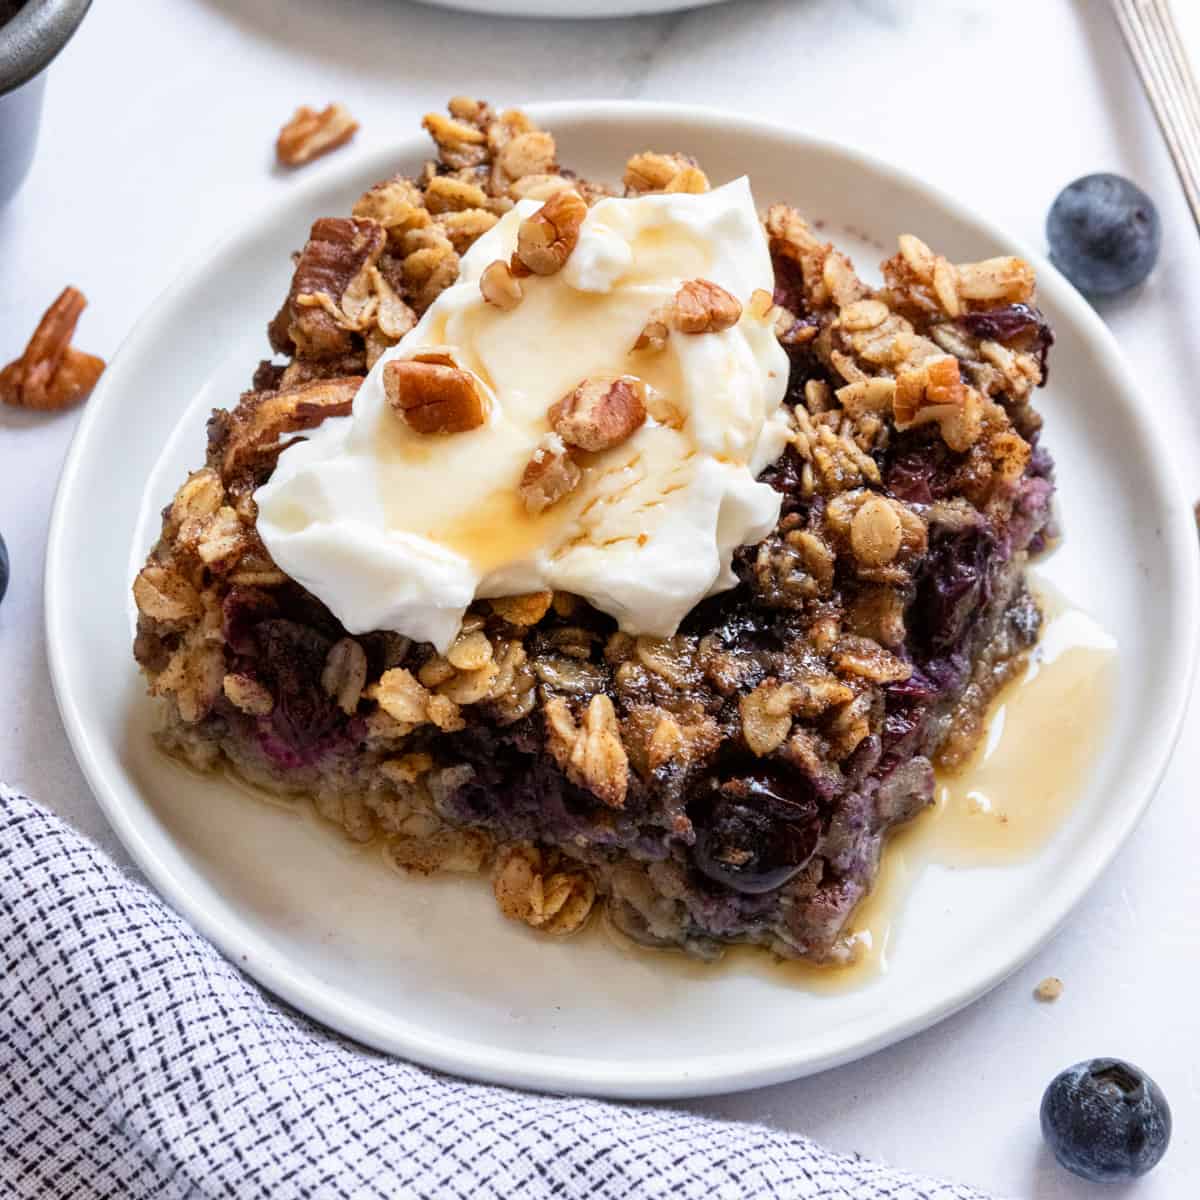 Blueberry oatmeal baked on plate with yogurt and maple syrup.